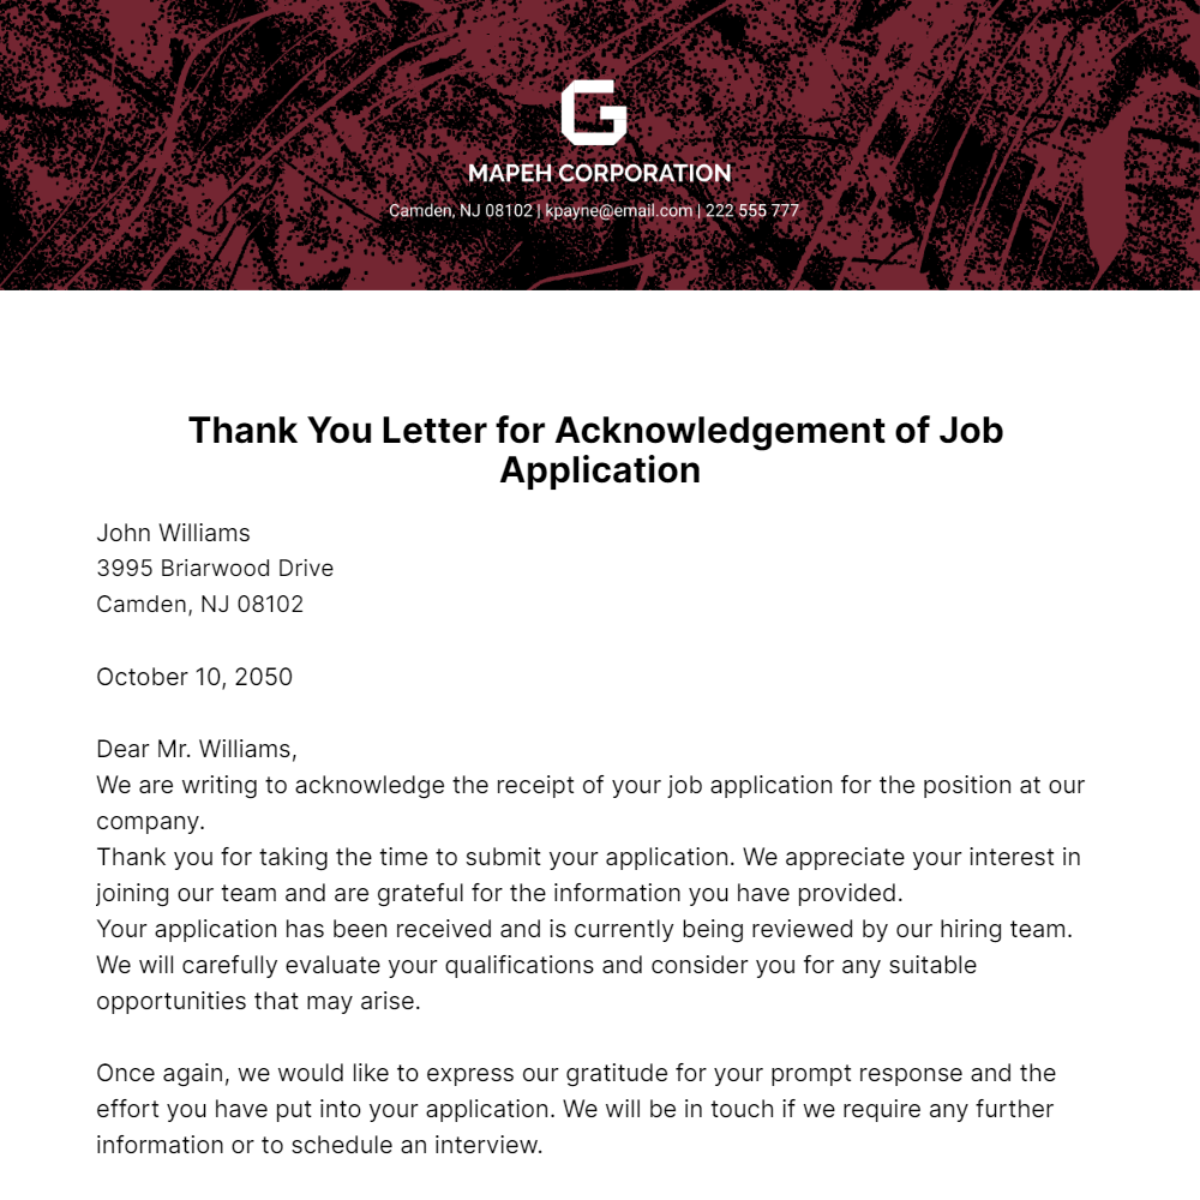 Thank you Letter for Acknowledgement of Job Application Template